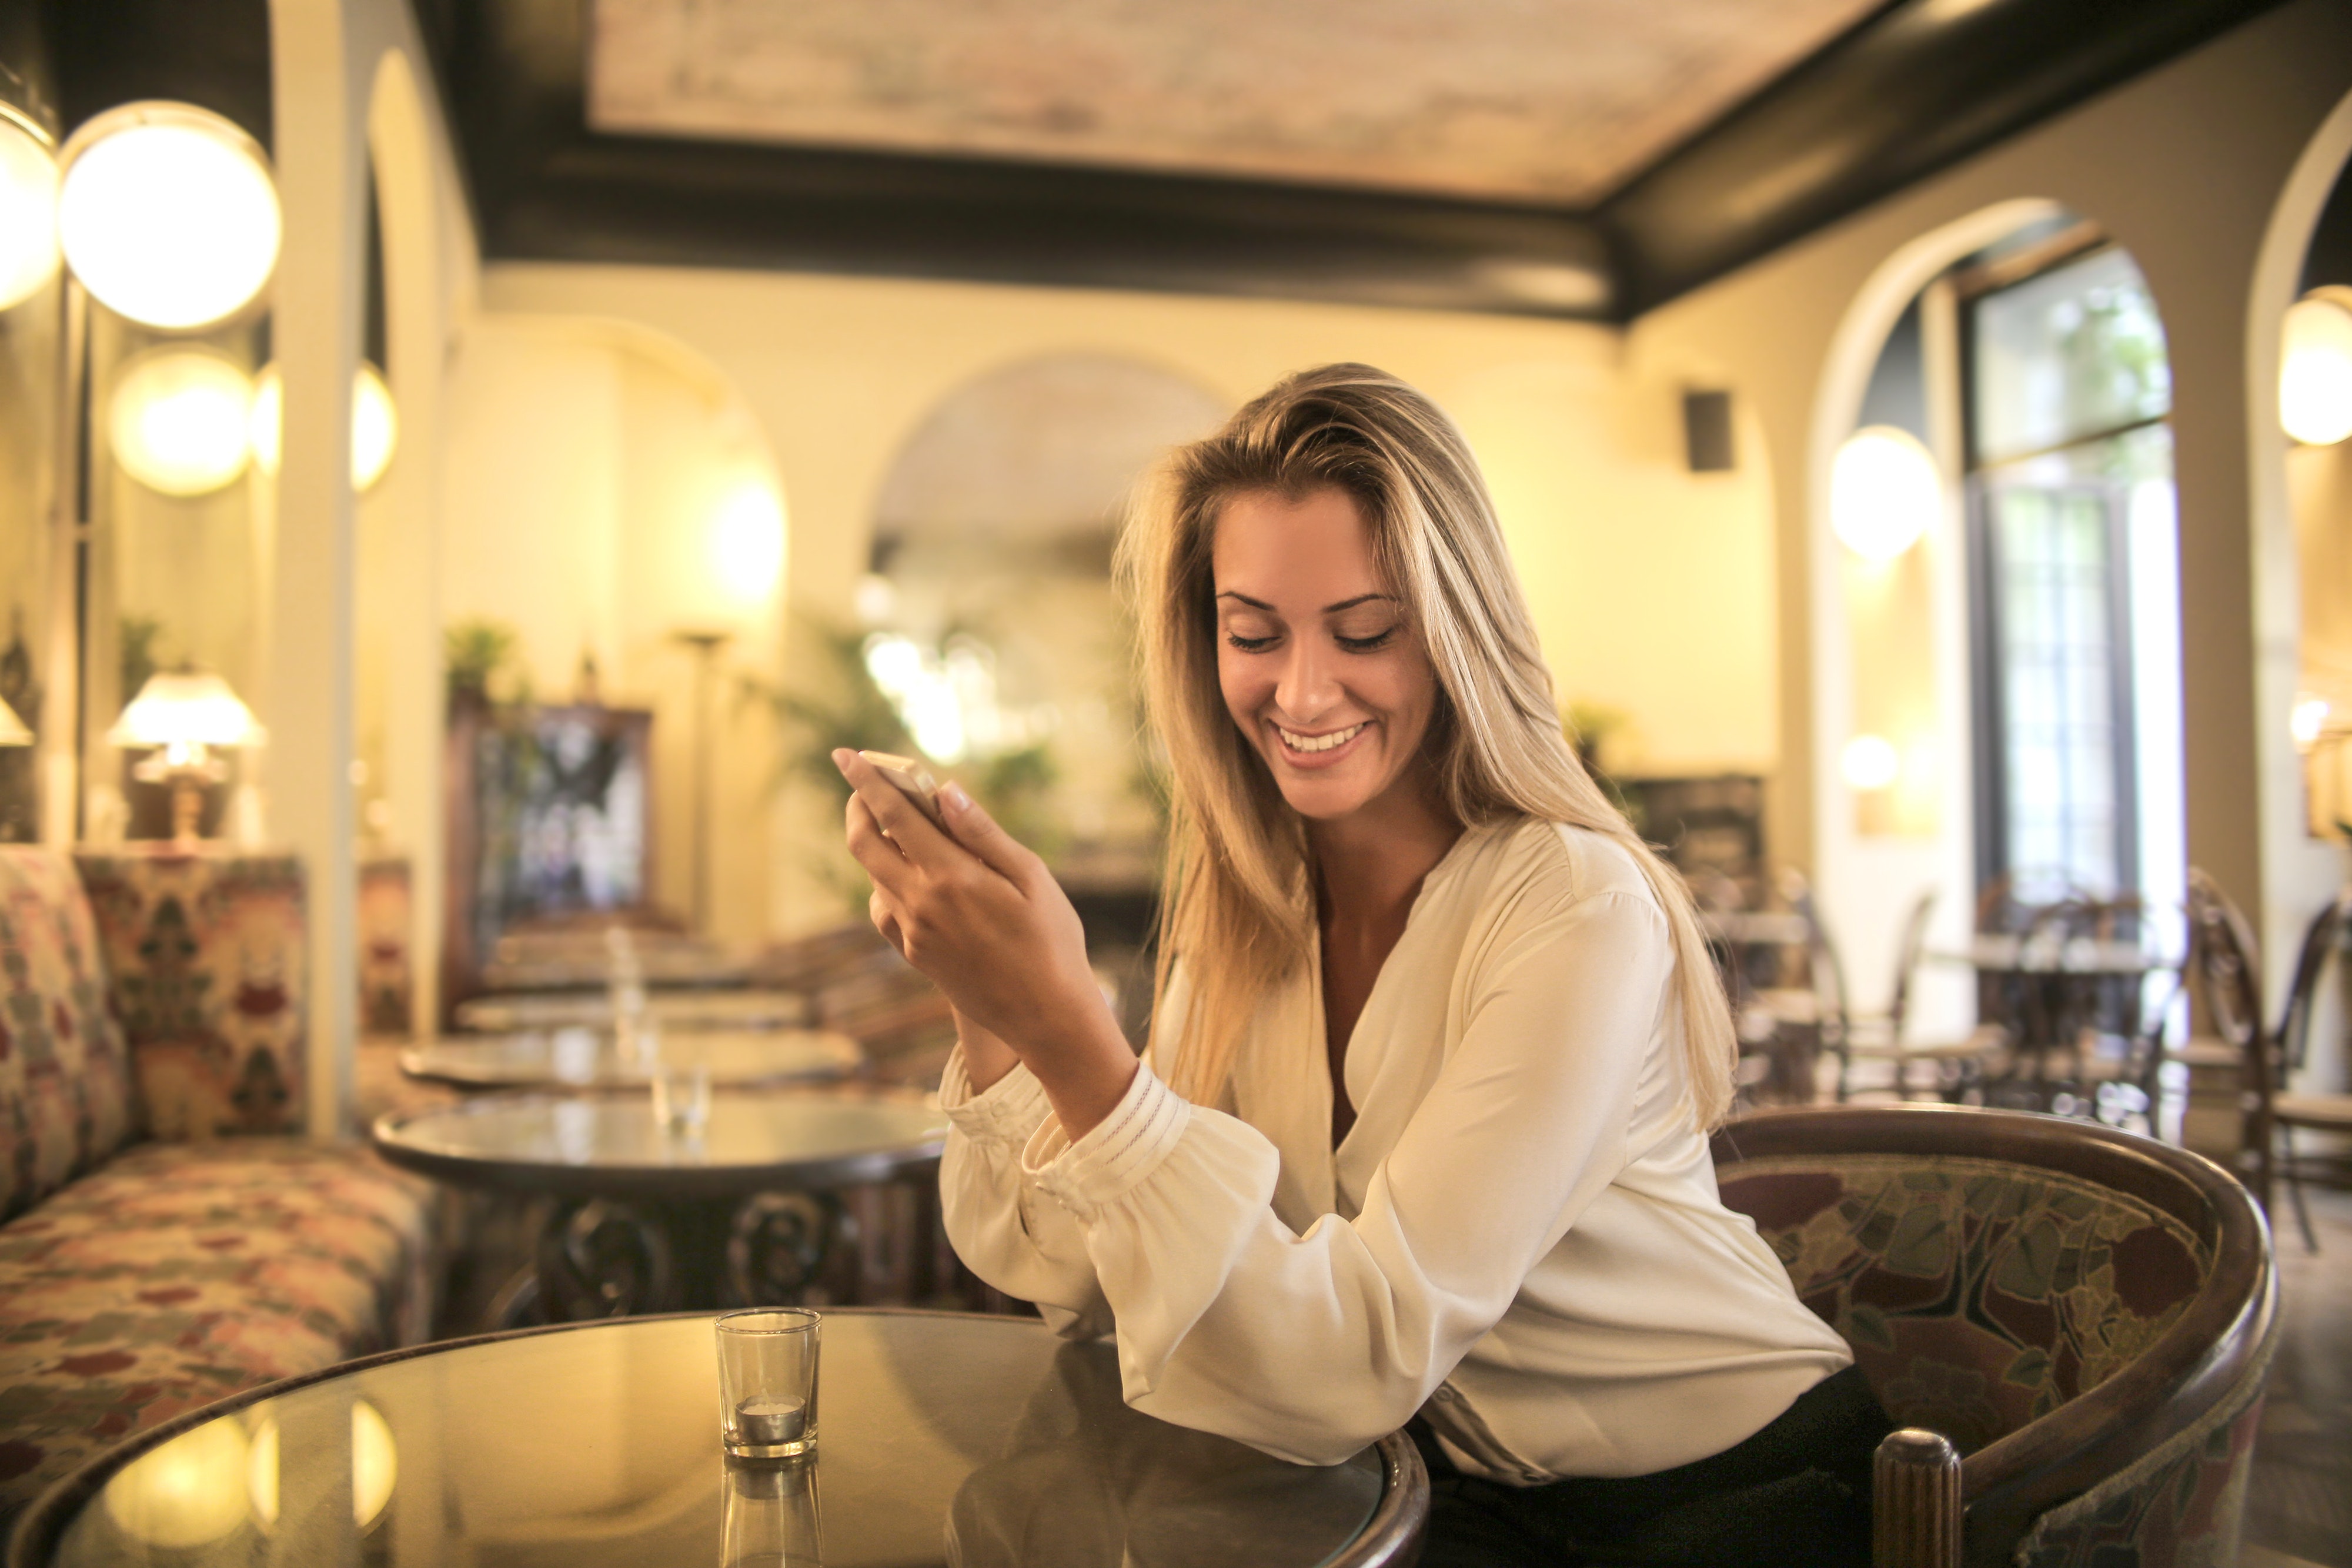 Blog: How Hotels Can Get More Out of Mobile